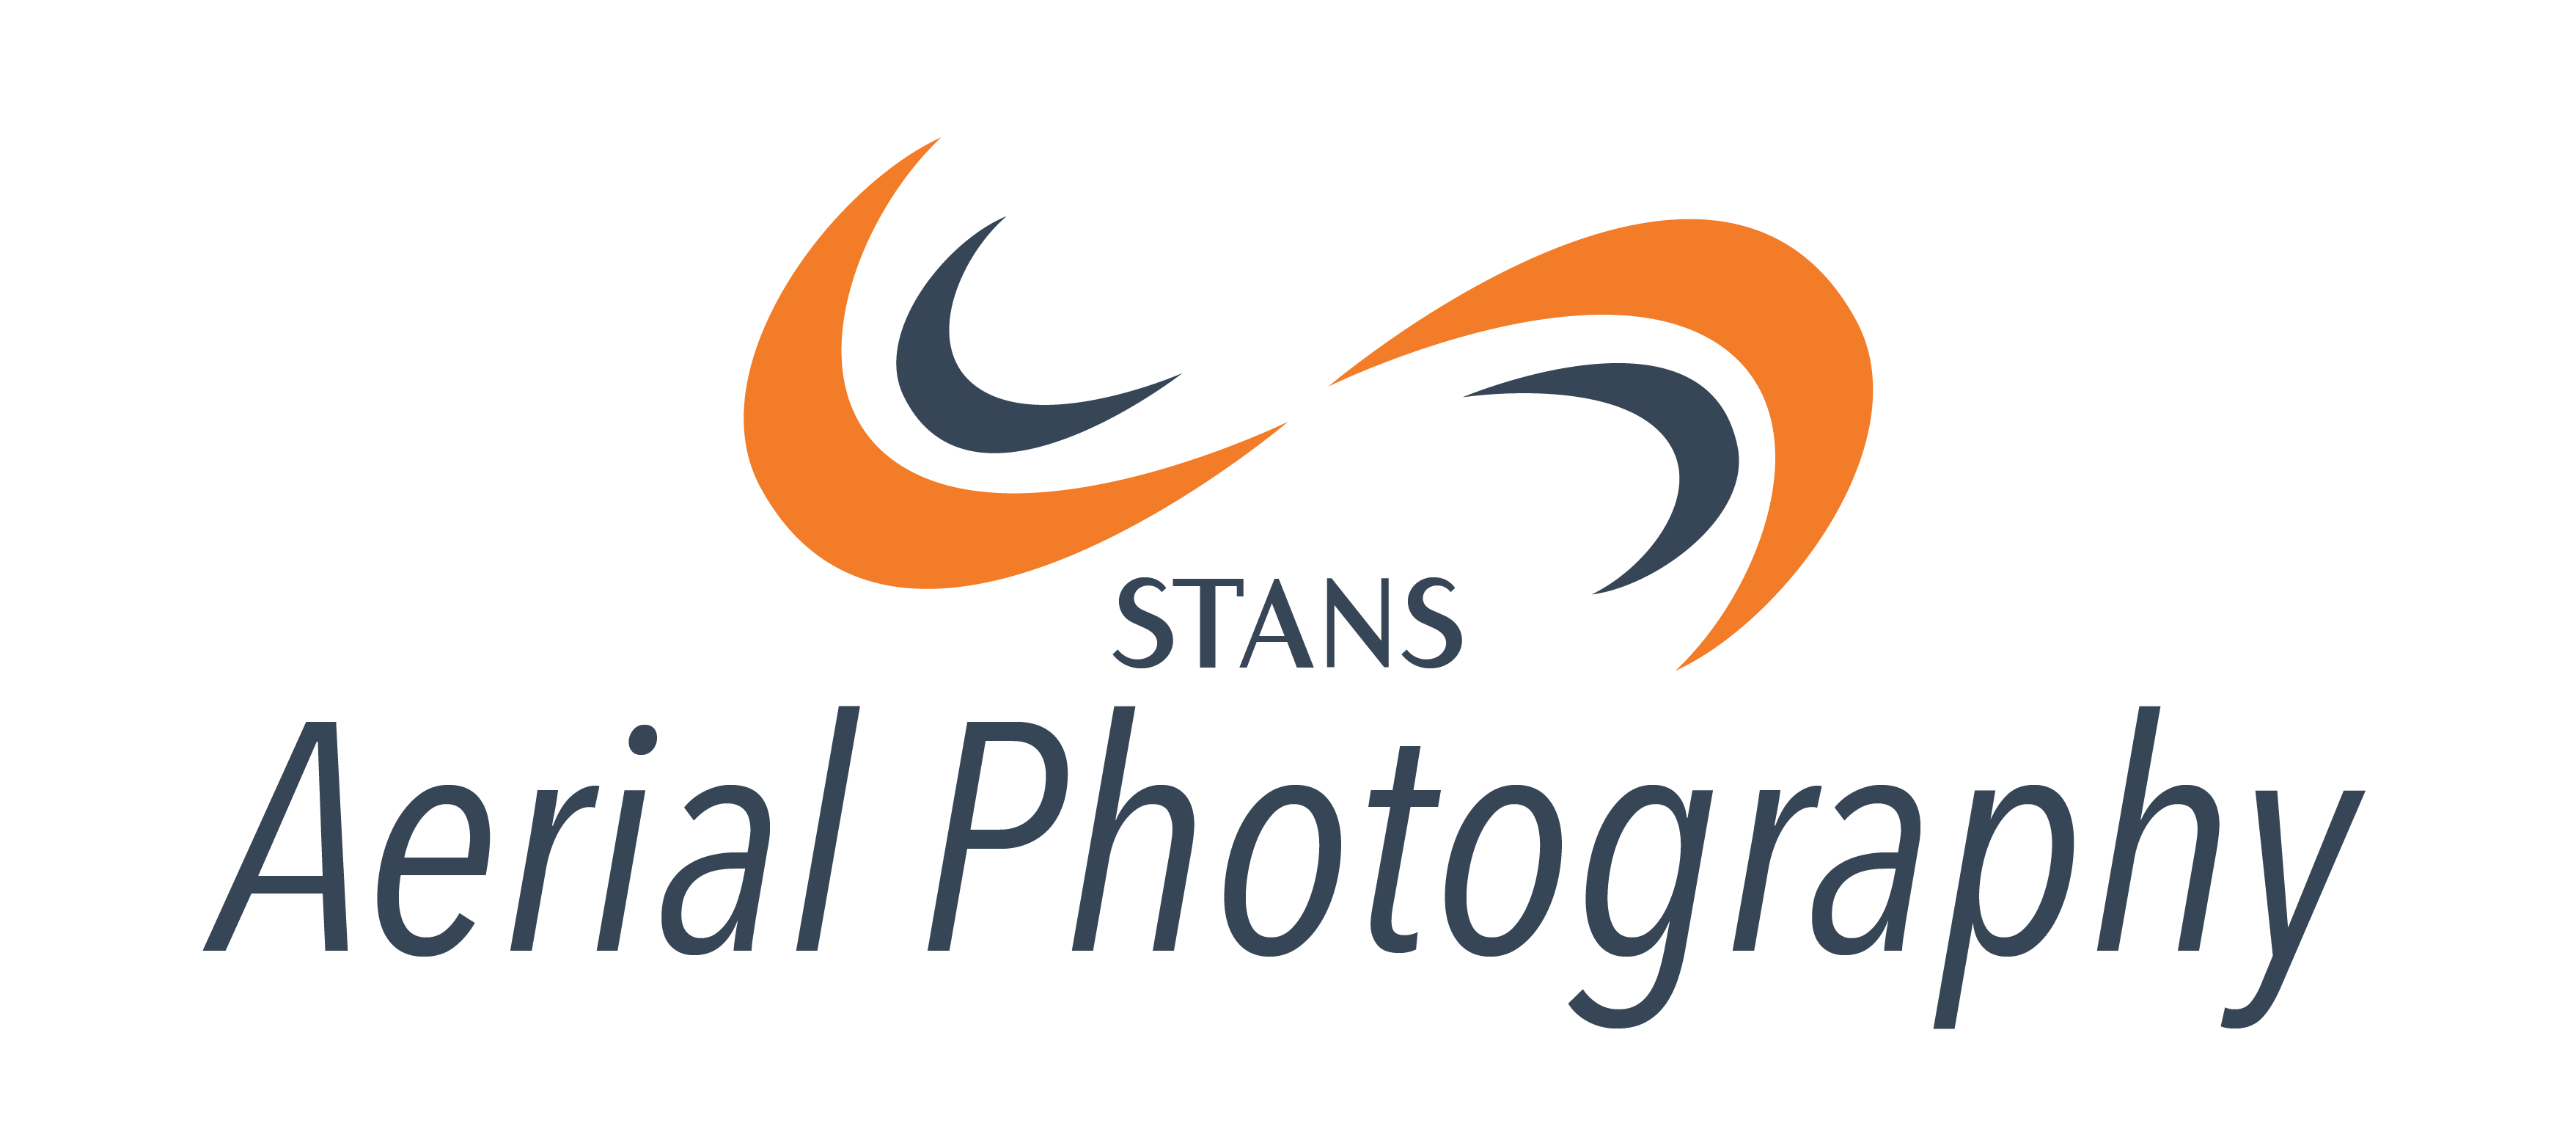 Stans Aerial Photography Logo-01